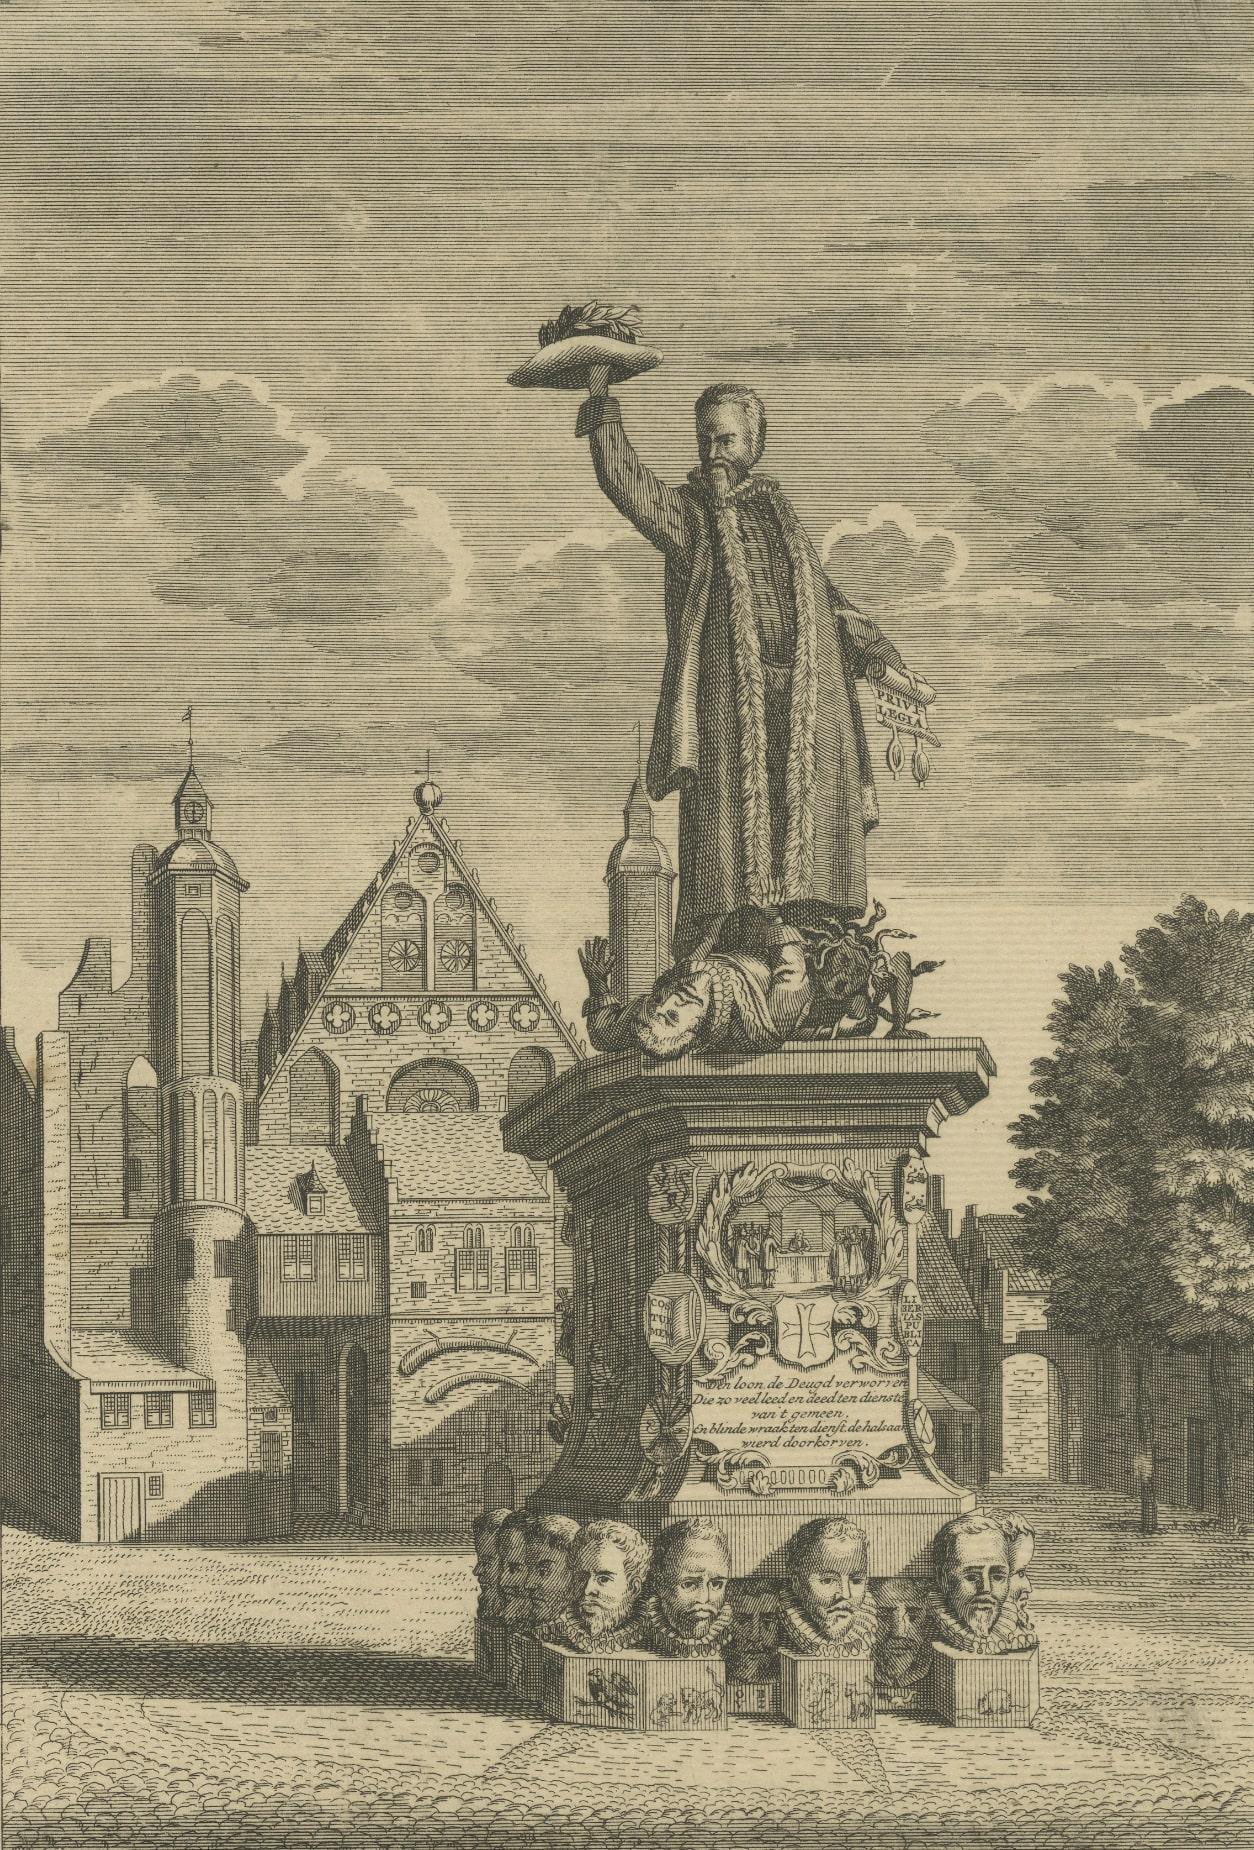 Antique print titled 'Praalbeeld voor den Vader des Vaderlands'. Fictive statue of Johan van Oldenbarnevelt on the Binnenhof, The Hague; full-length wearing a fur-lined robe, holding up the hat of liberty in the right hand and a scroll in the left;